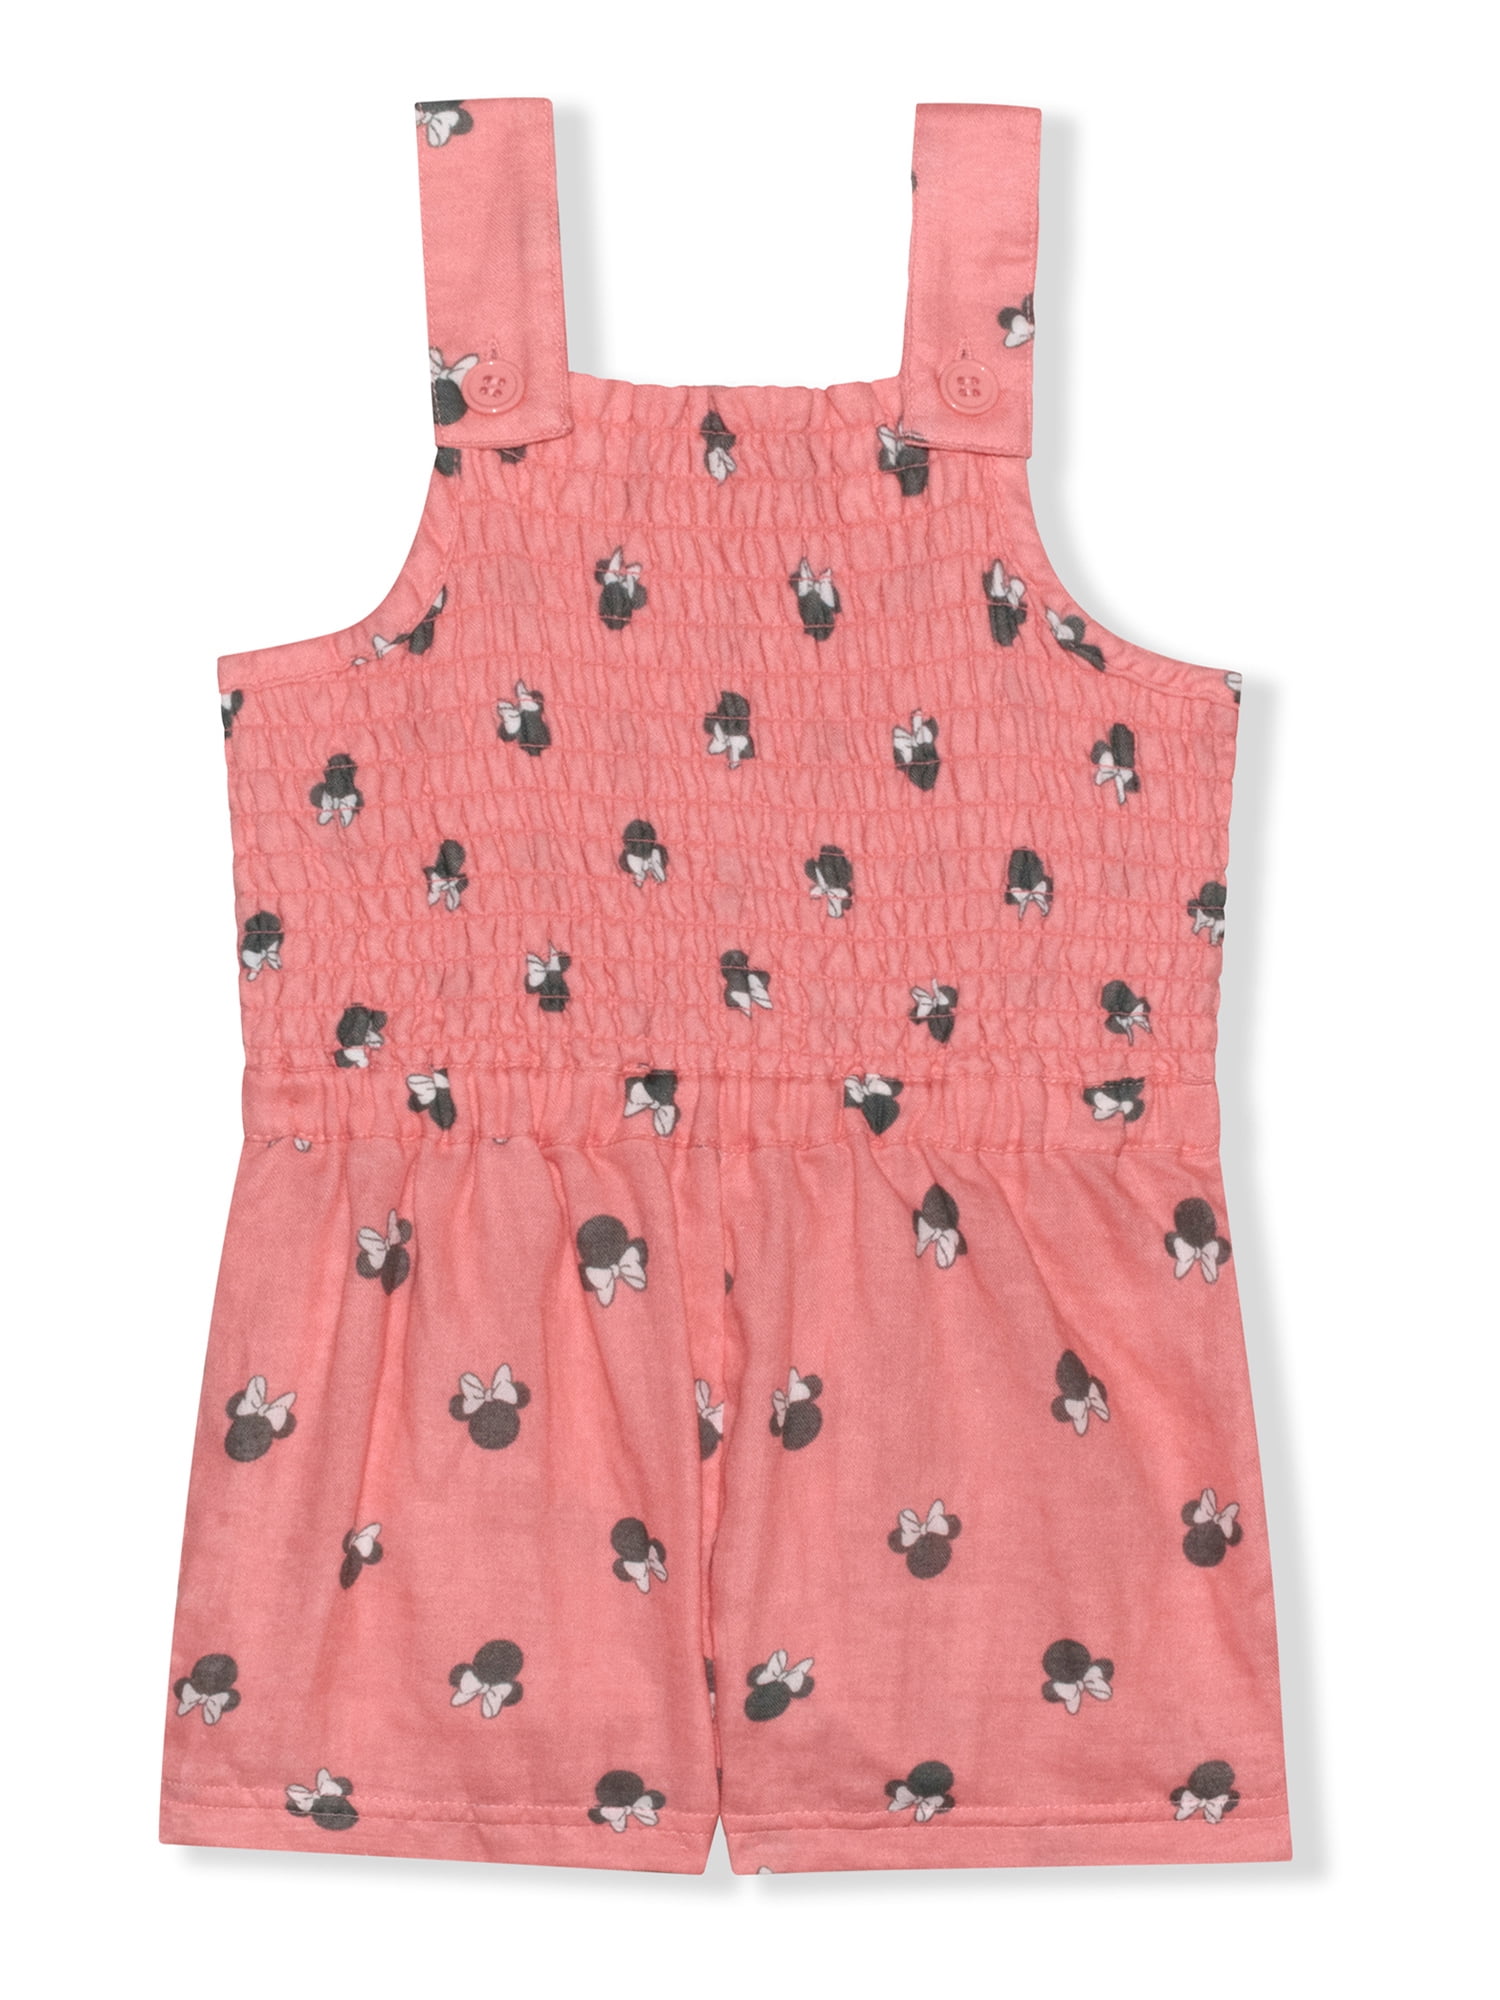 Ijsbeer Bestuiver Geest Minnie Mouse Baby and Toddler Girl Romper, 12 Months-5T - Walmart.com